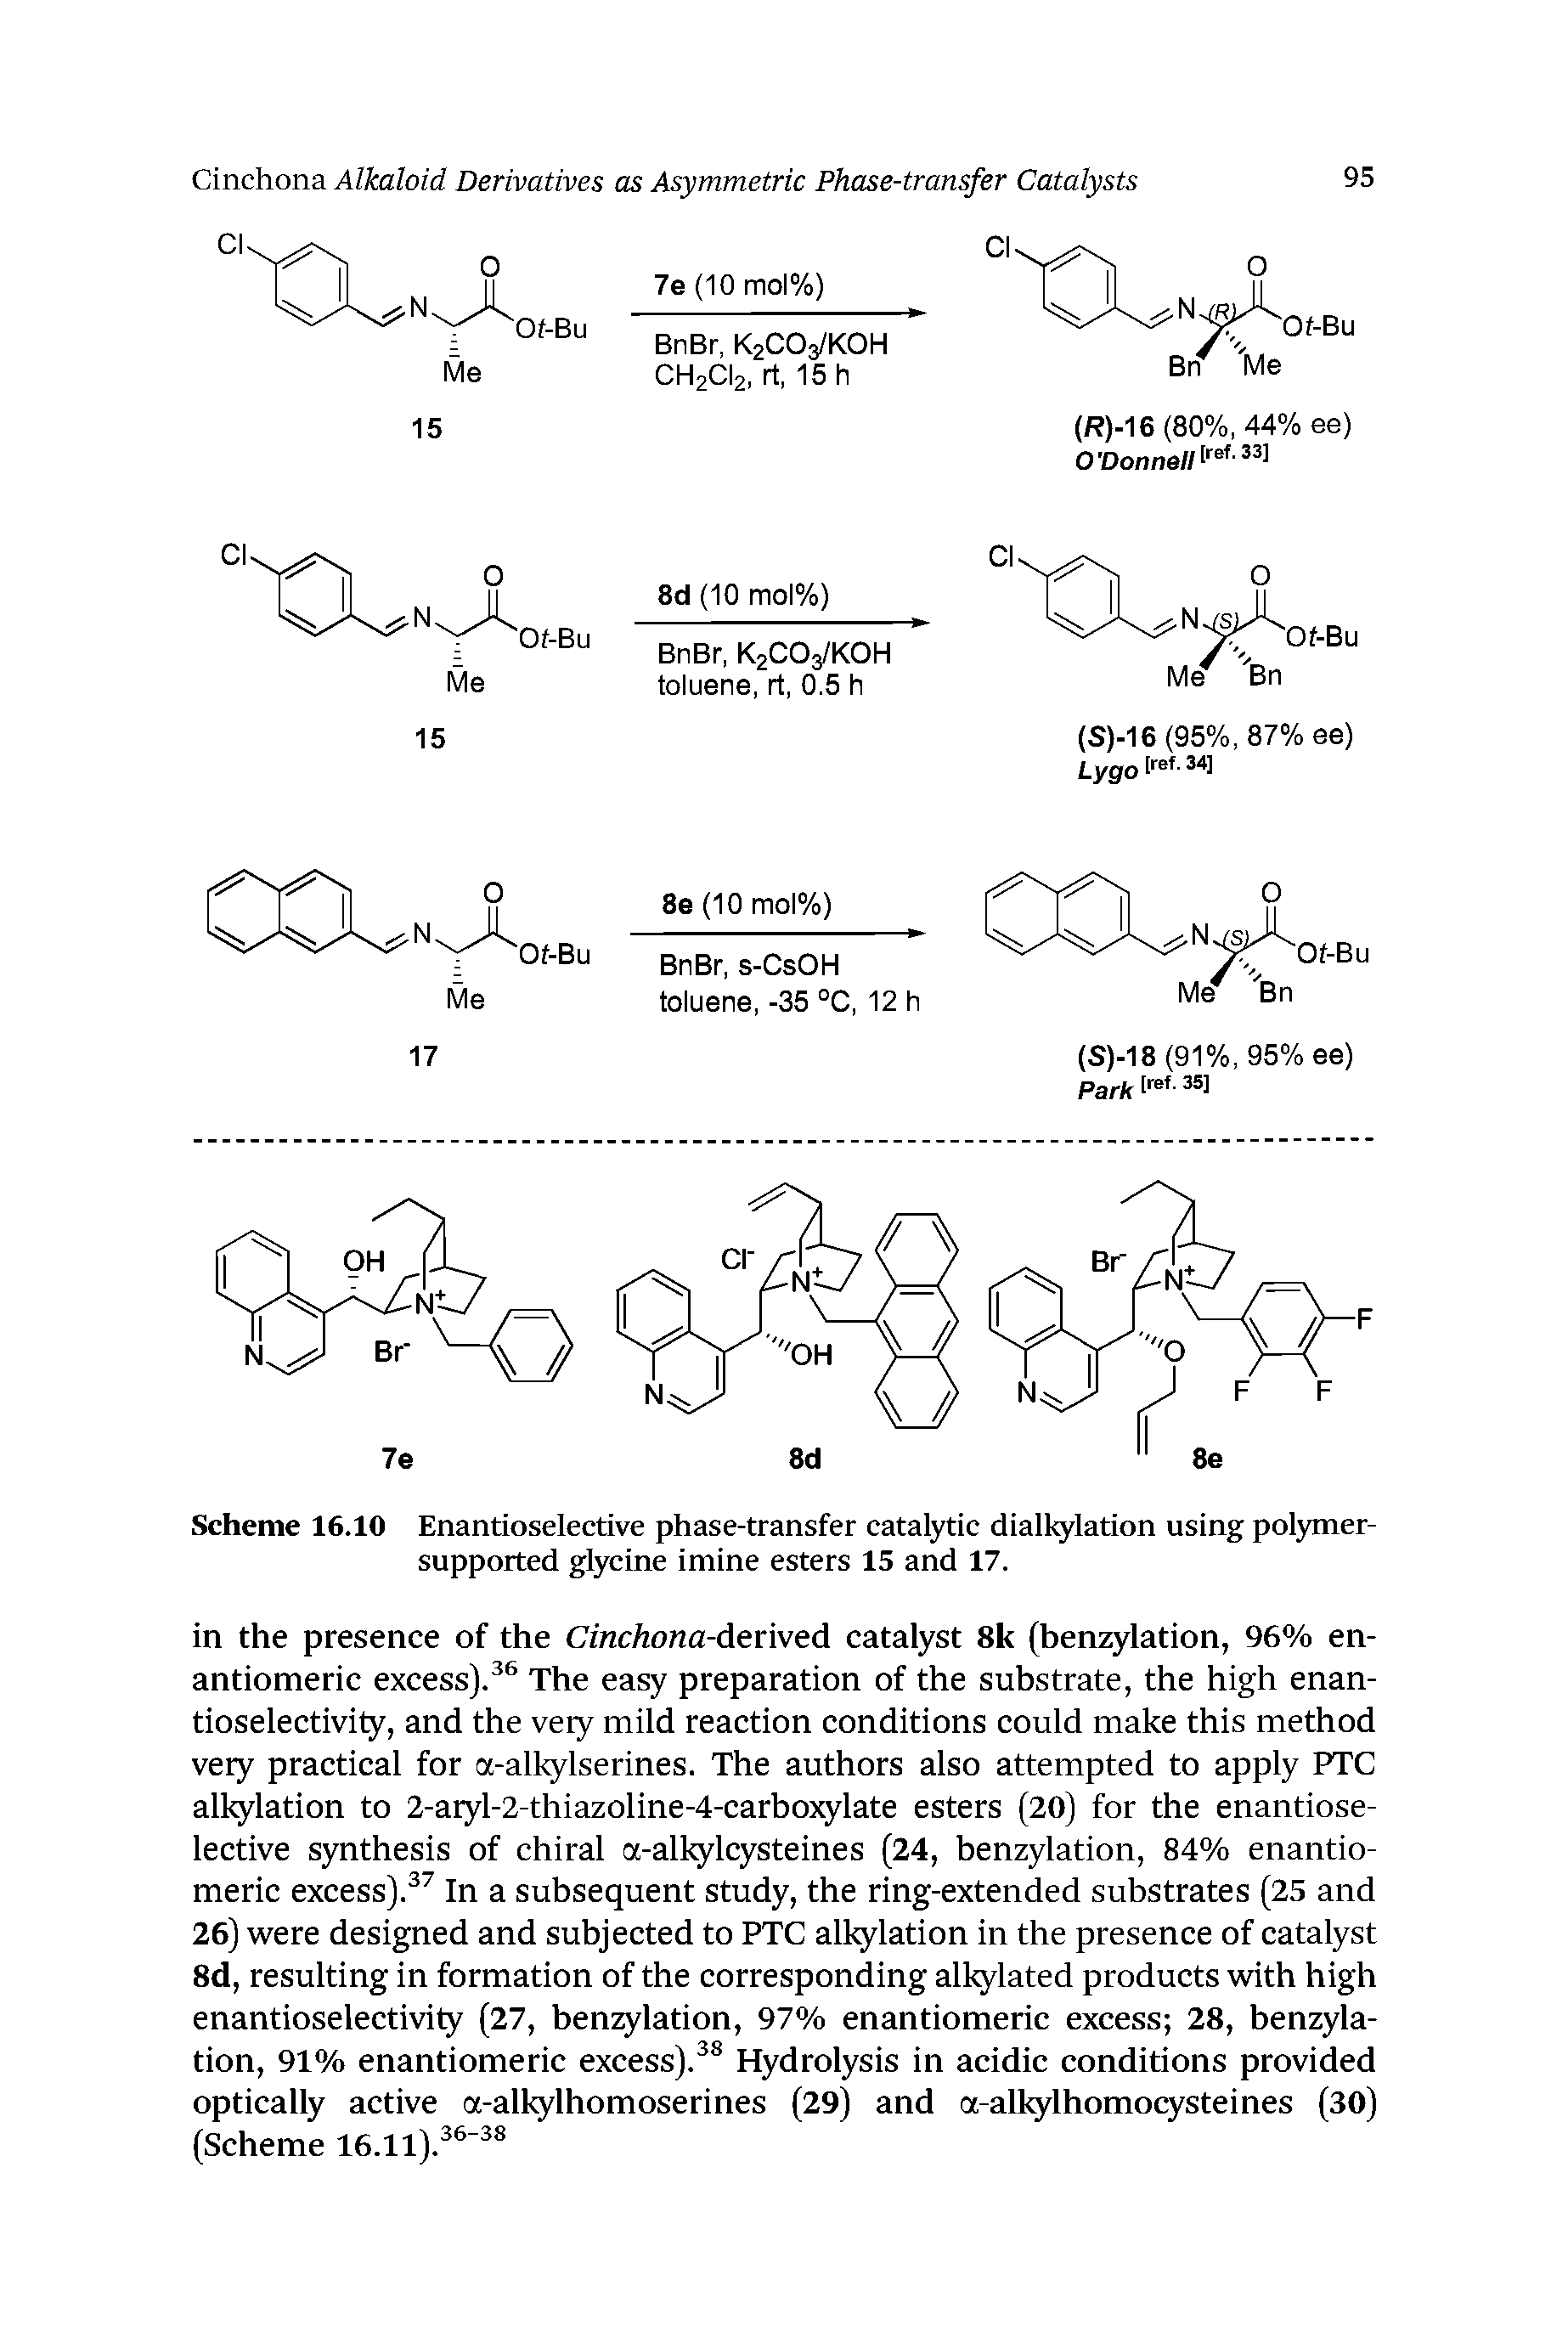 Scheme 16.10 Enantioselective phase-transfer catalytic diallq lation using polymer-supported glycine imine esters 15 and 17.